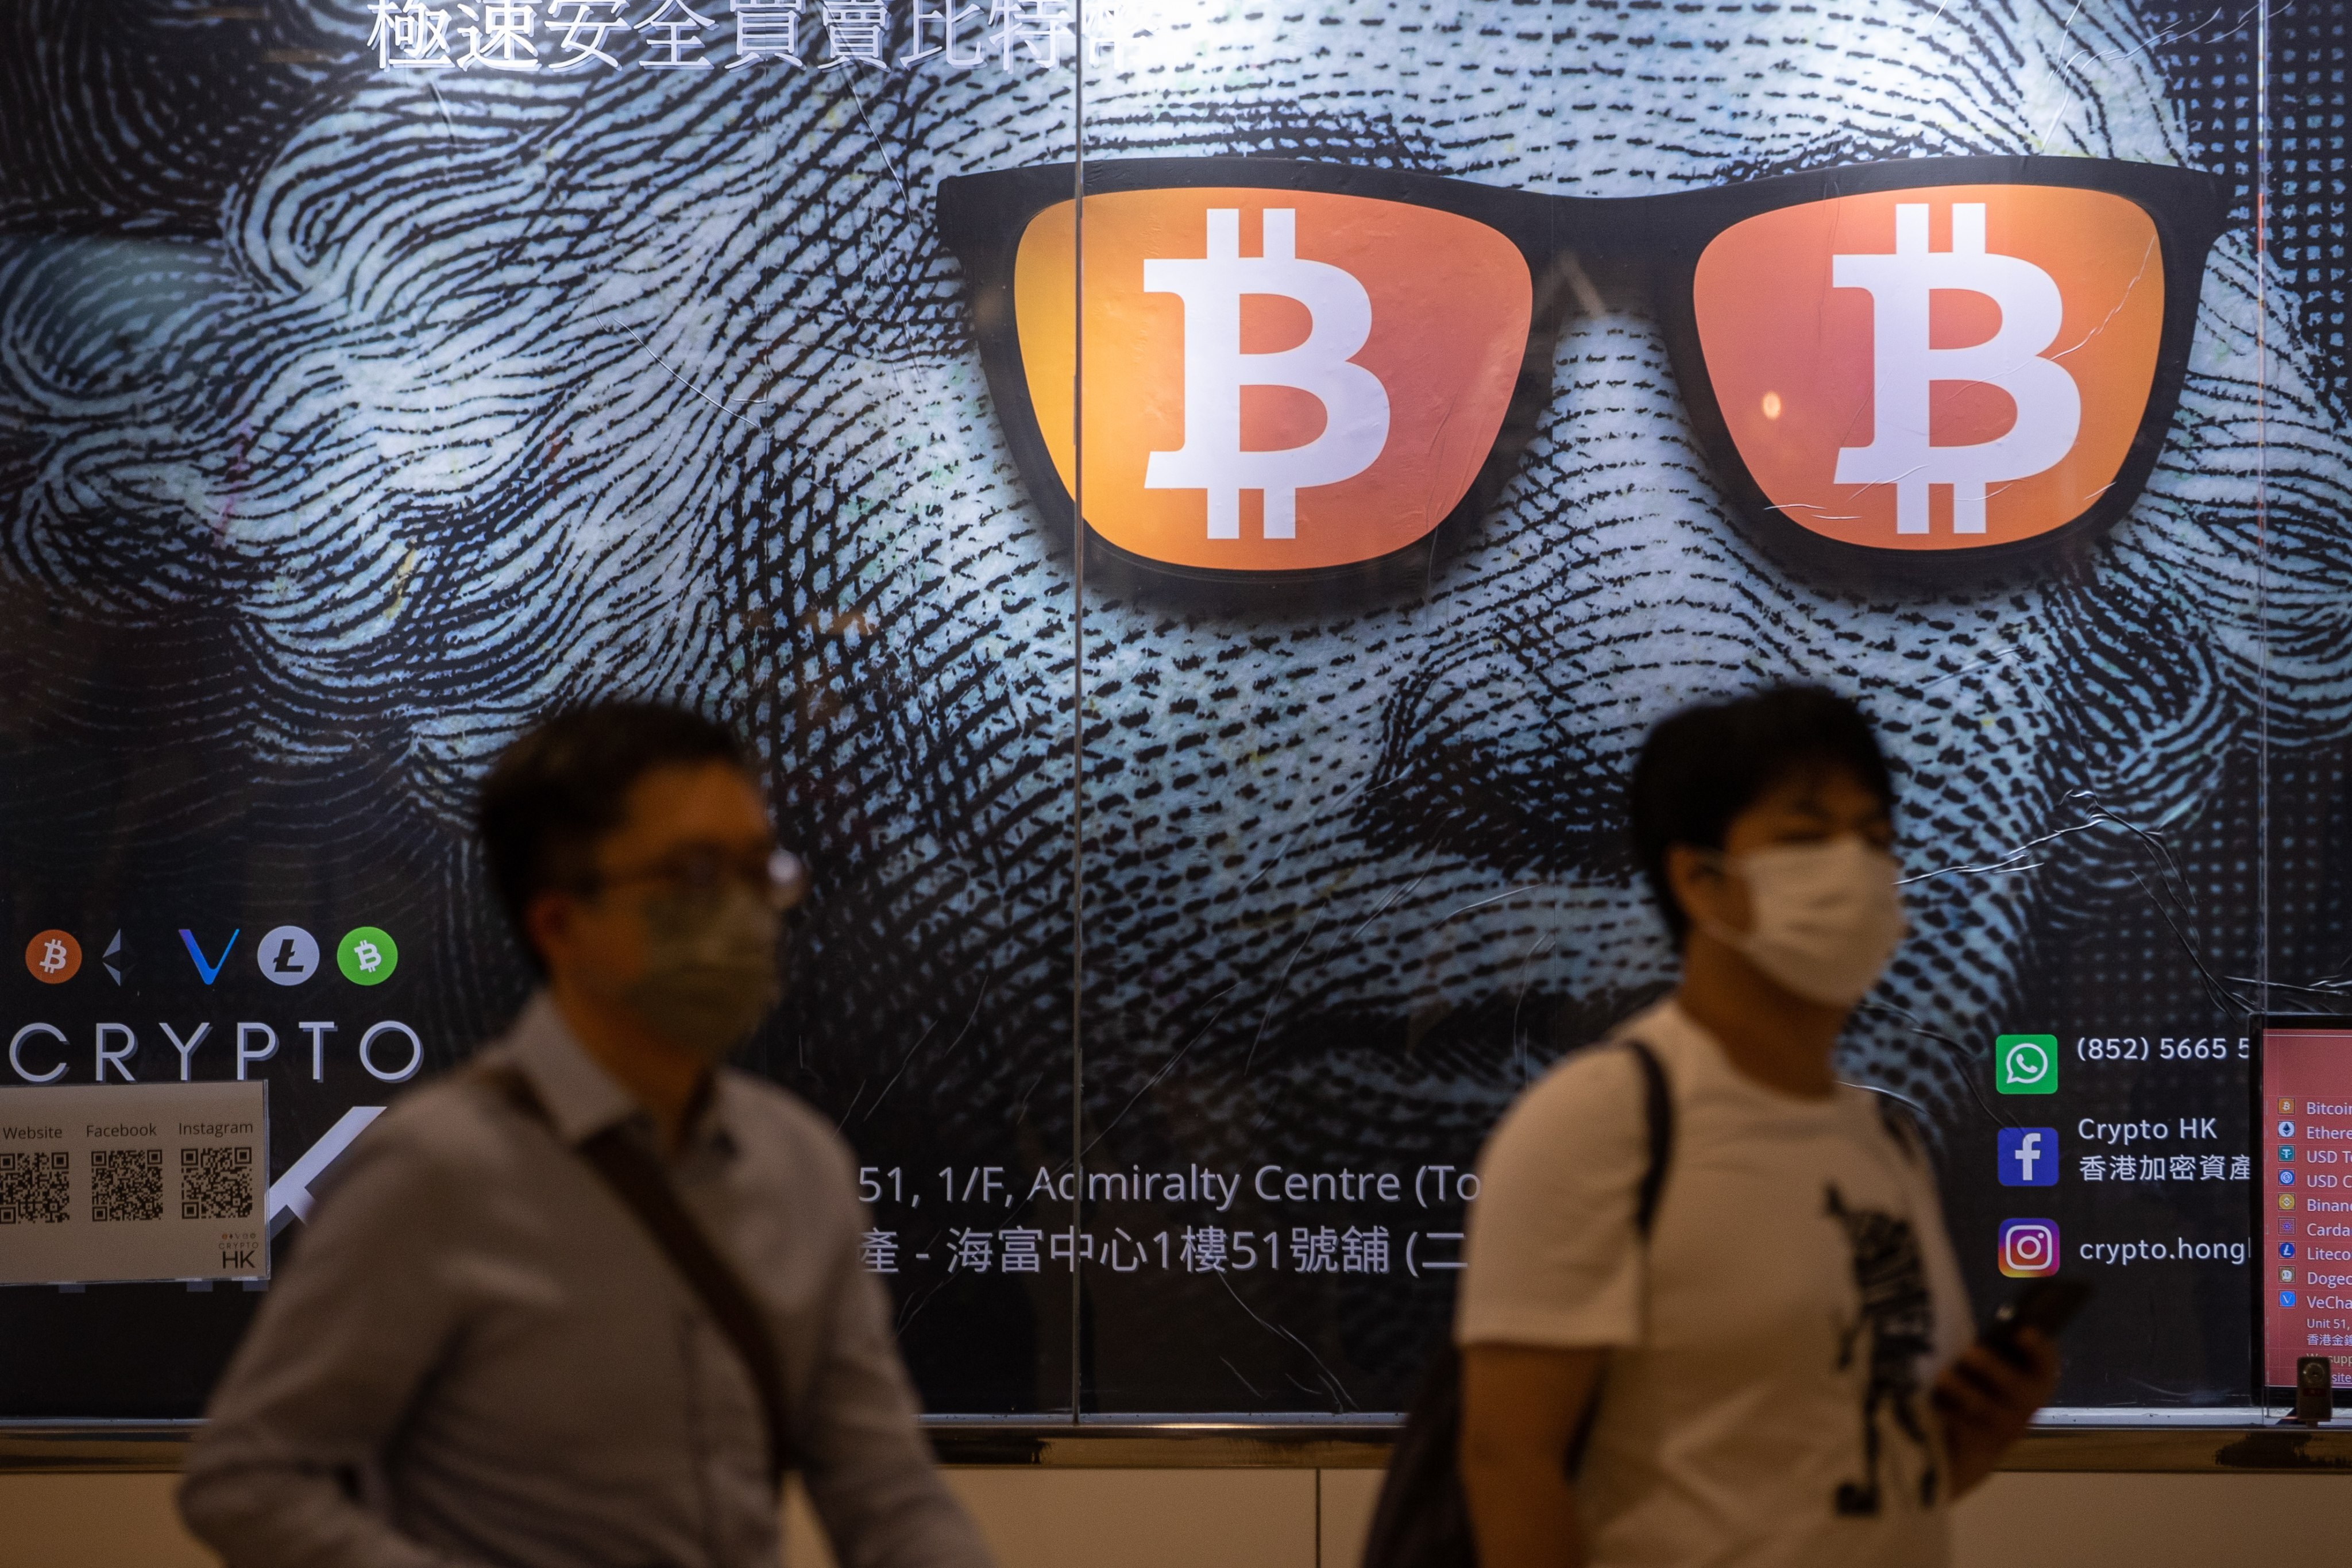 Two men walk past a poster for bitcoin and other cryptocurrencies in Hong Kong on September 25. Photo: EPA-EFE